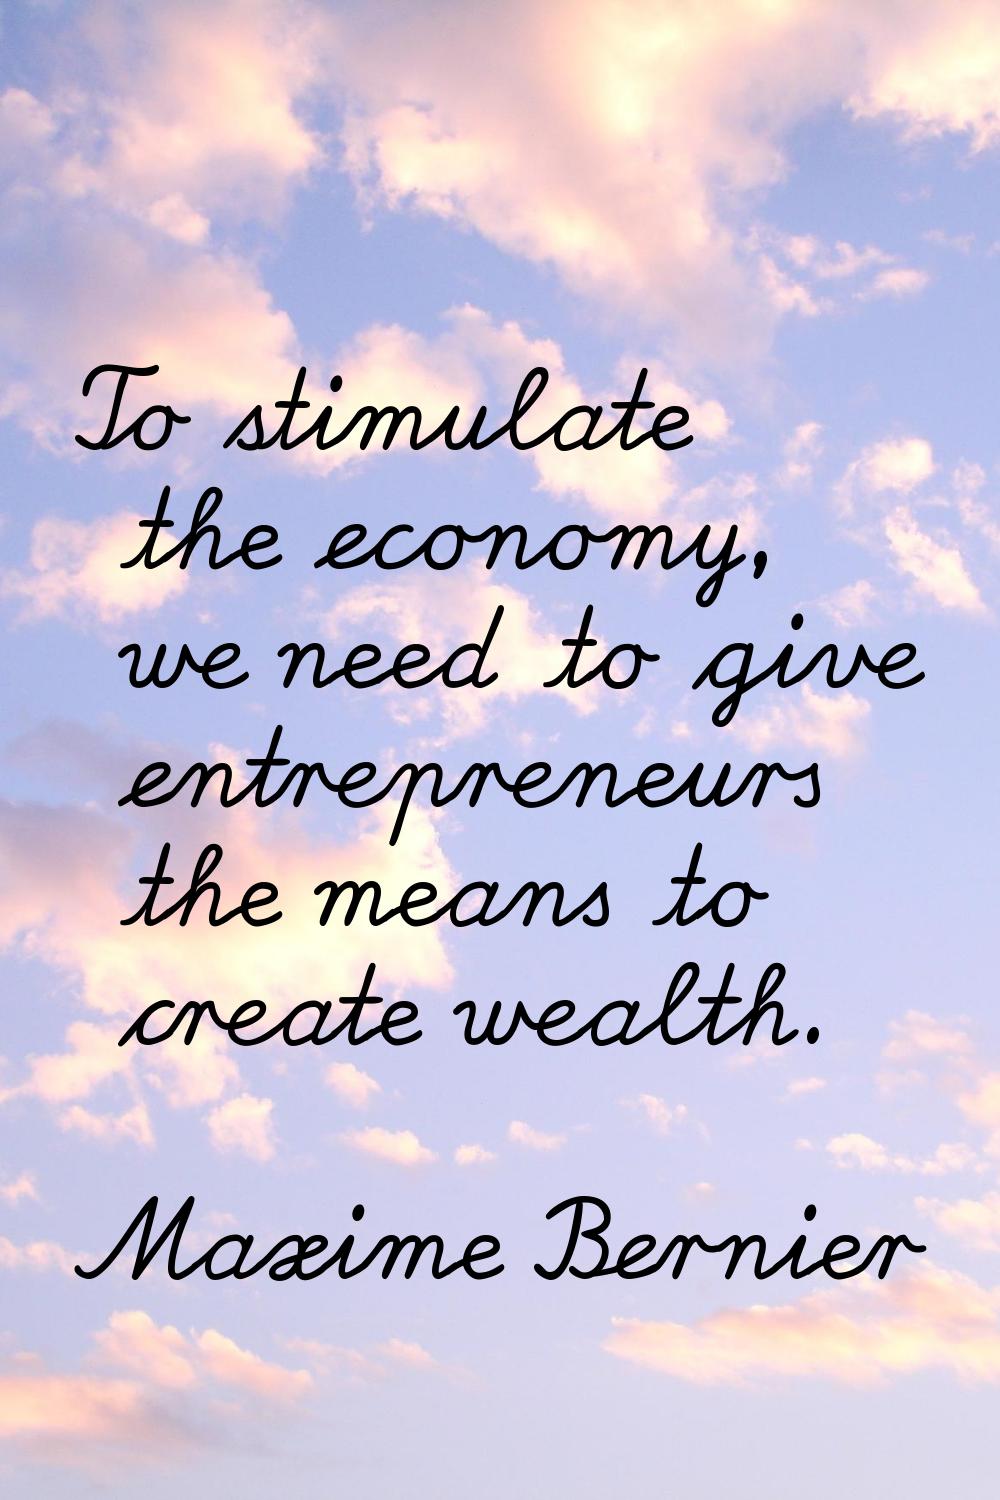 To stimulate the economy, we need to give entrepreneurs the means to create wealth.